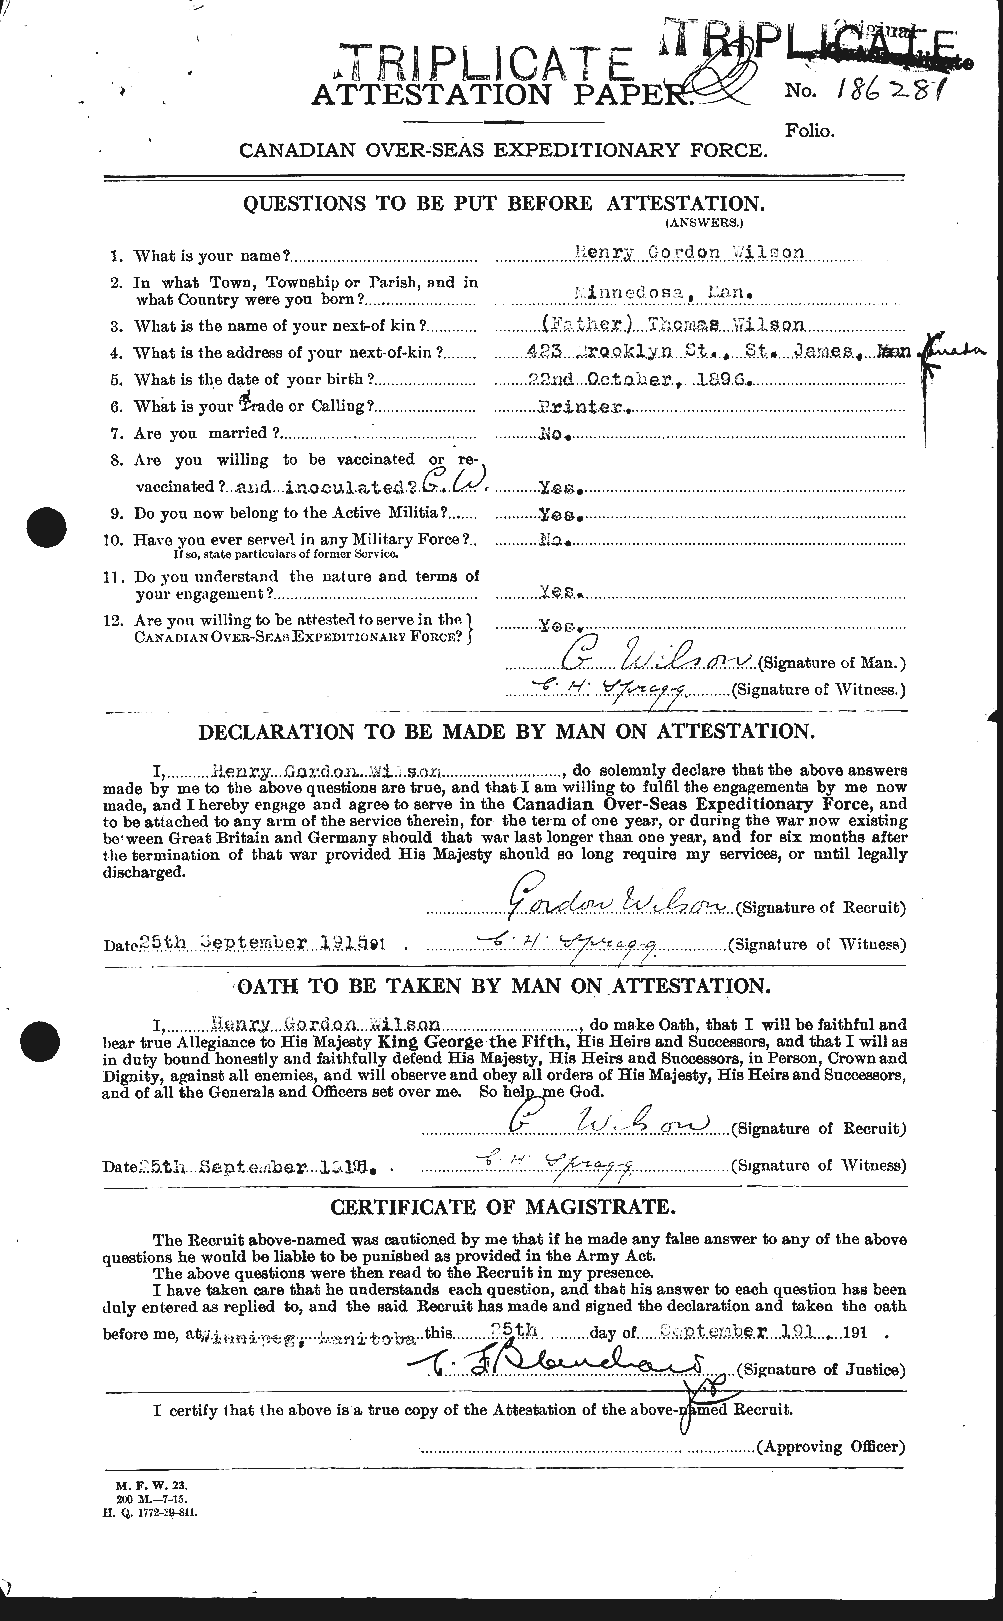 Personnel Records of the First World War - CEF 679524a